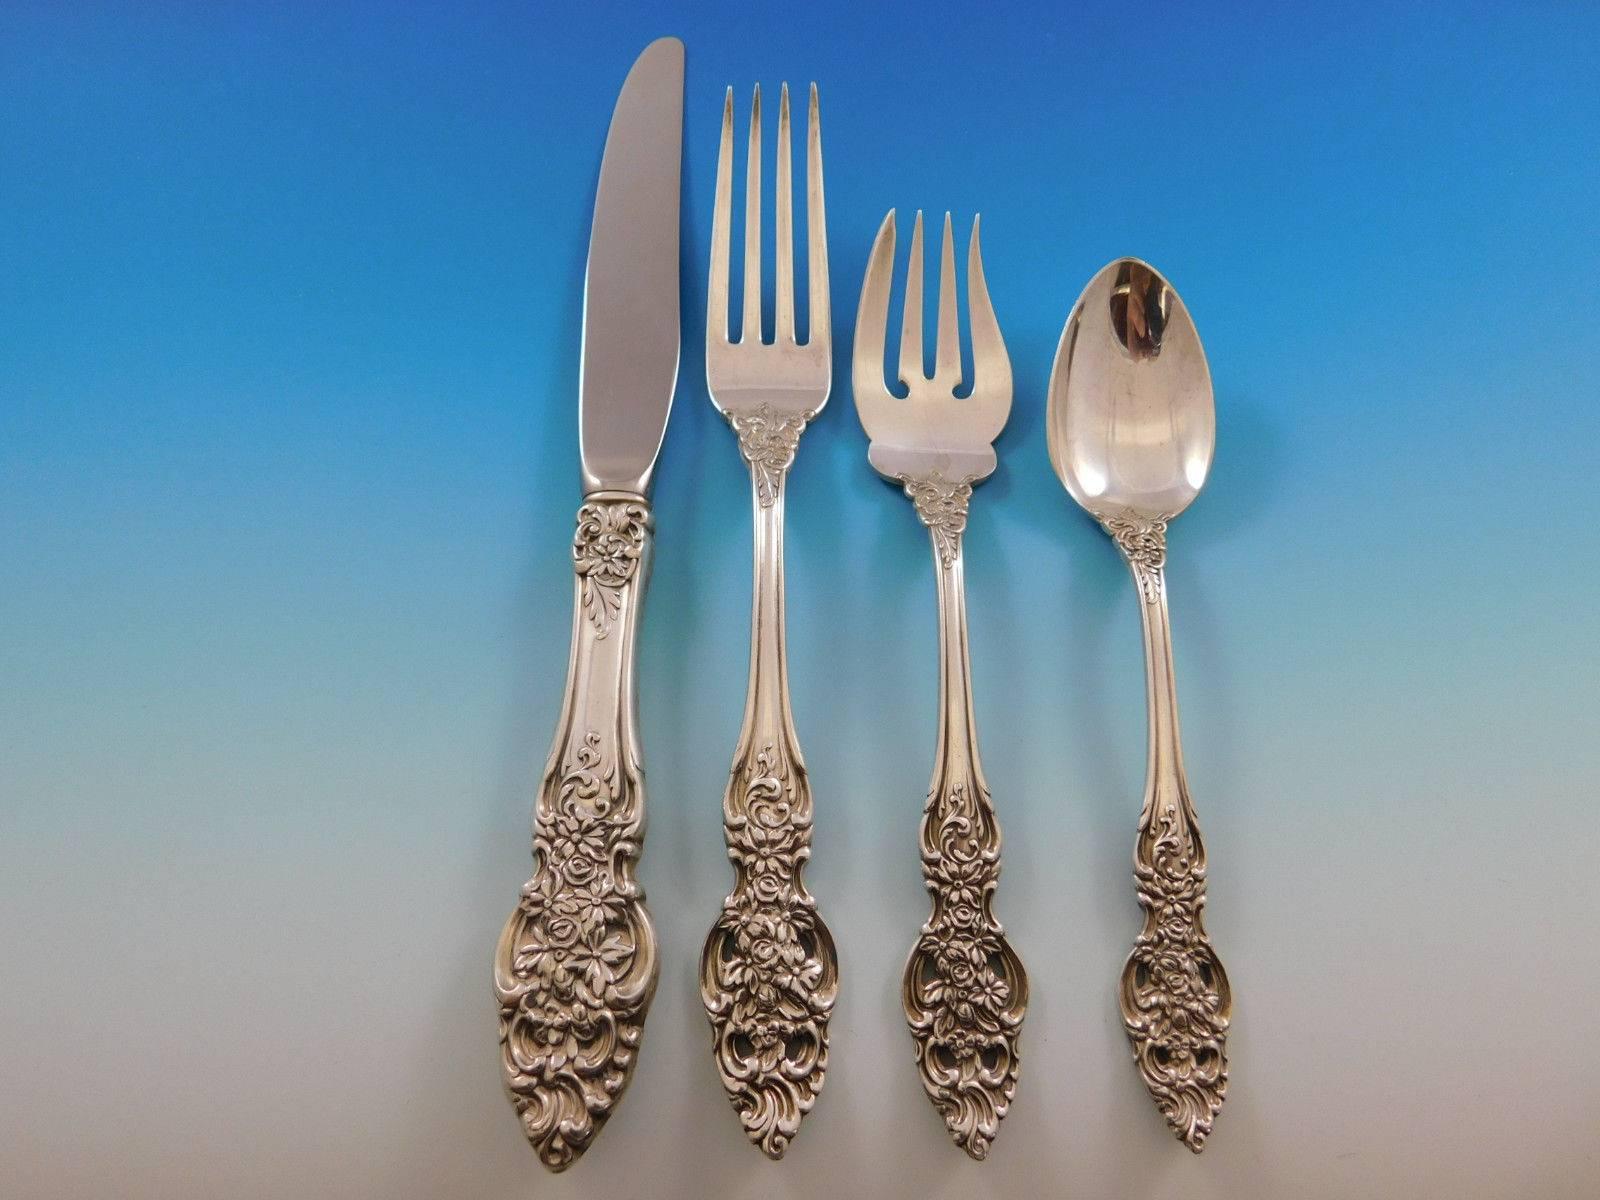 Beautiful Vienna by Reed & Barton sterling silver flatware set, 48 pieces. This set includes:

Eight knives, 9 1/8